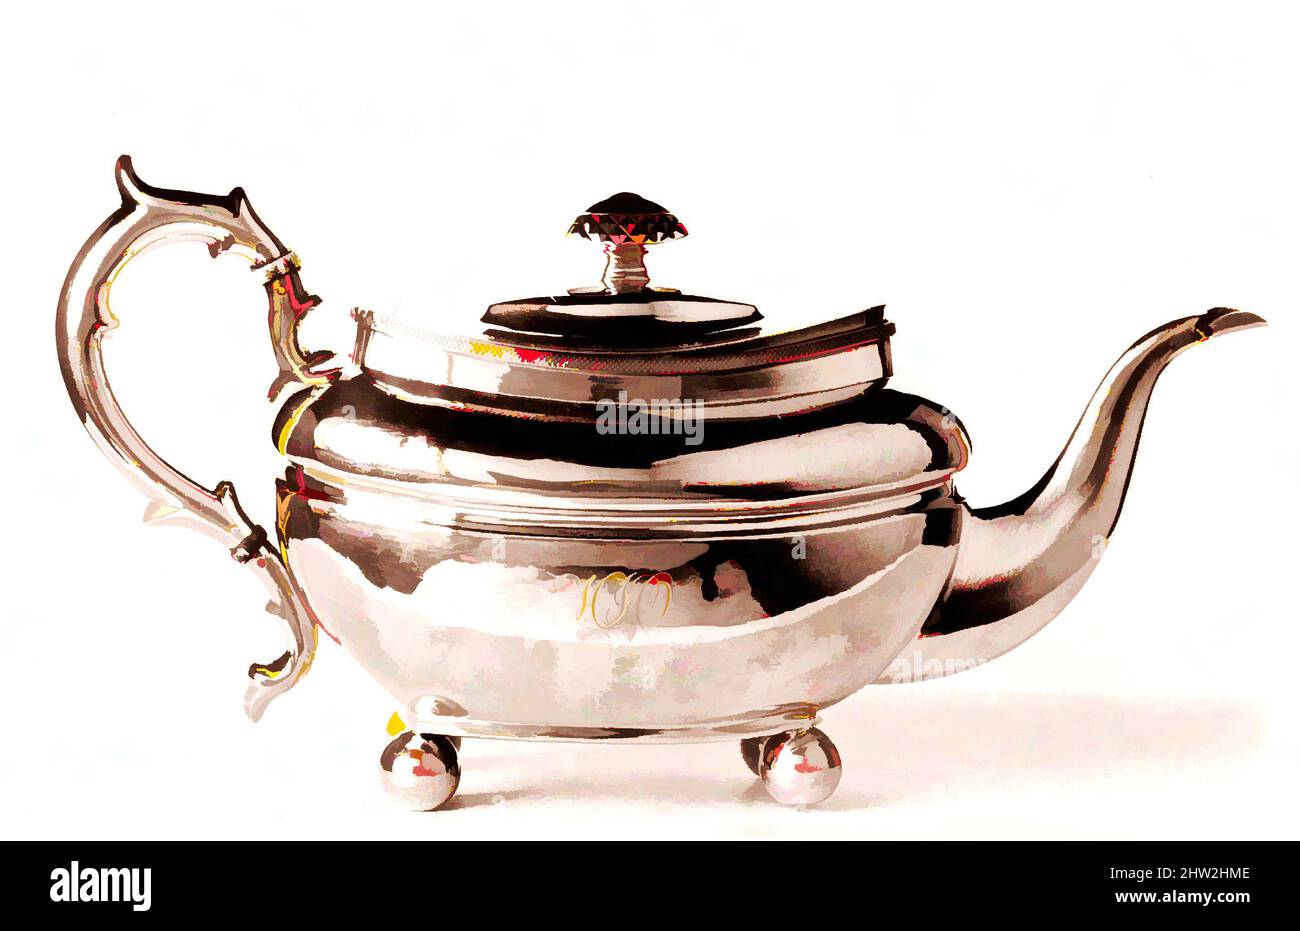 Art inspired by Teapot, ca. 1810, Made in New York, New York, United States, American, Silver, 6 5/8 x 12 15/16 x 5 3/8 in. (16.8 x 32.9 x 13.7 cm); 20 oz. 19 dwt. (651.7 g), Silver, Garret Forbes (1785–1851, Classic works modernized by Artotop with a splash of modernity. Shapes, color and value, eye-catching visual impact on art. Emotions through freedom of artworks in a contemporary way. A timeless message pursuing a wildly creative new direction. Artists turning to the digital medium and creating the Artotop NFT Stock Photo